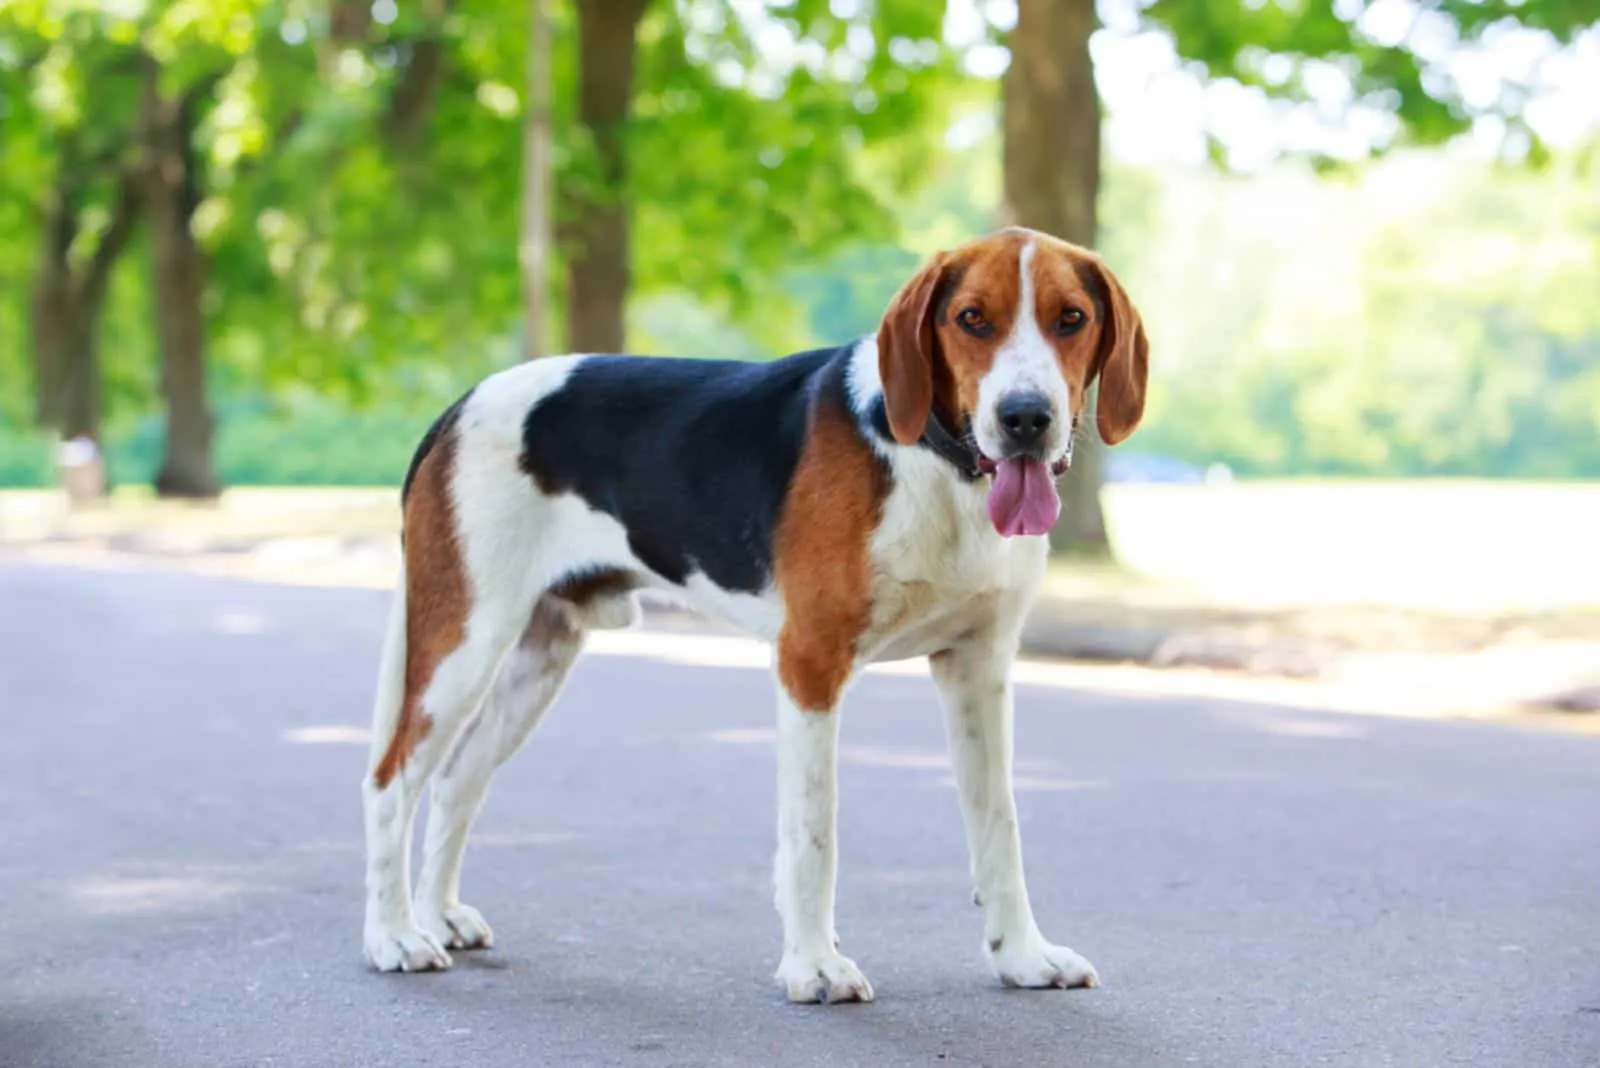 The dog breed American Foxhound in a public park